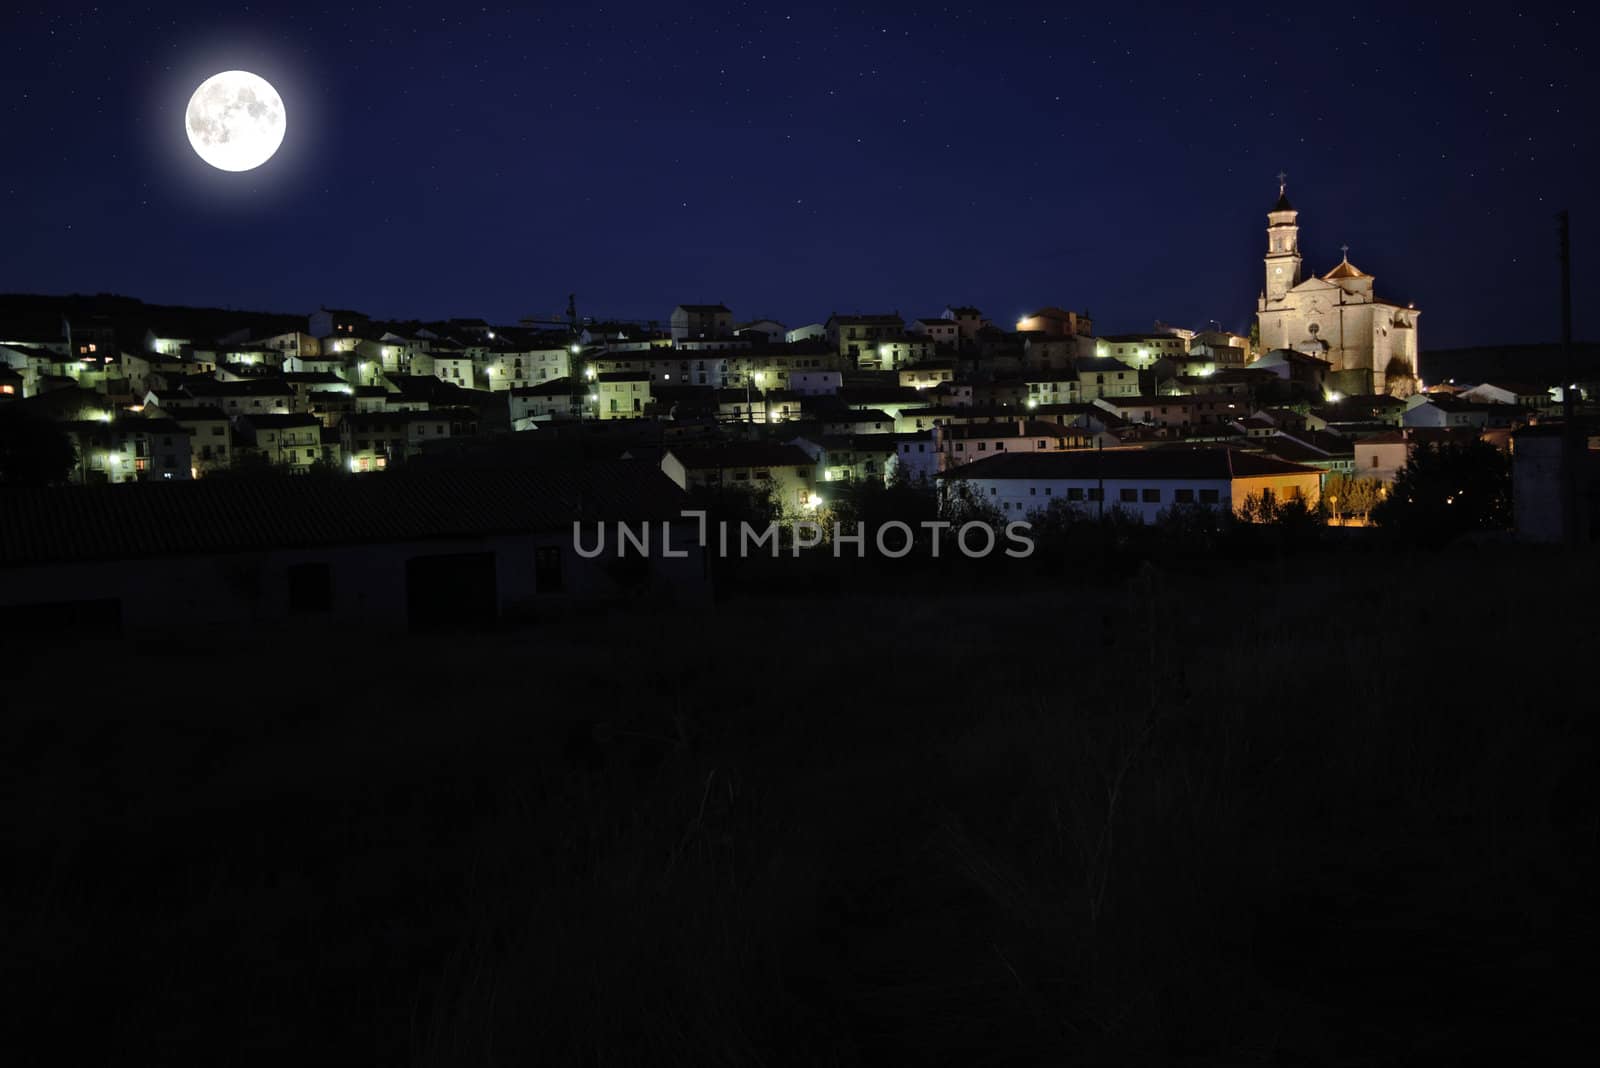 Village with cathedral under the light moon. 
Canon 40D 17-55mm f:2,8